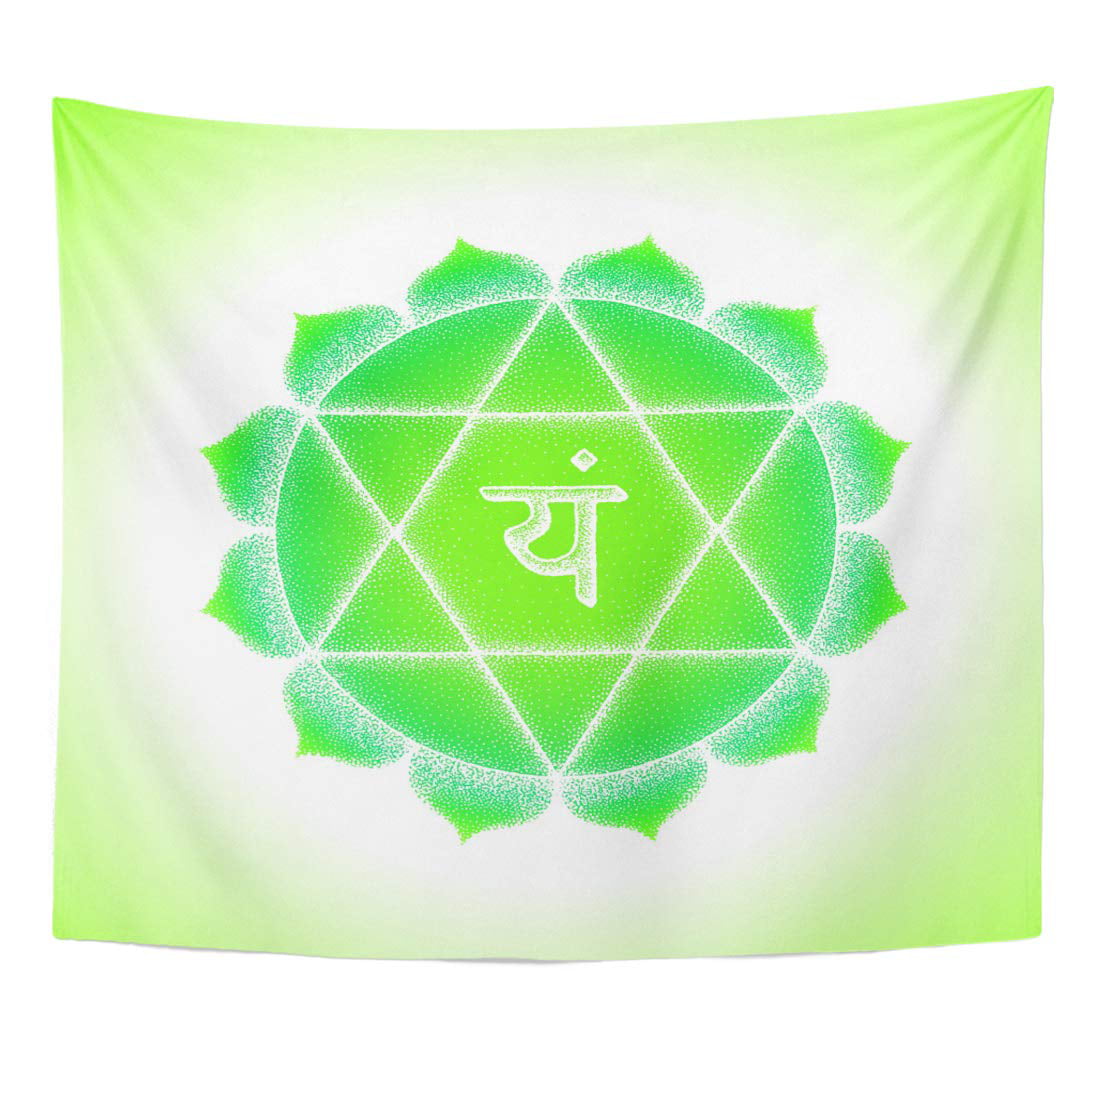 UFAEZU Fourth Heart Anahata Chakra Sanskrit Seed Mantra Yam Syllable Lotus  Petals Dot Work Tattoo White Wall Art Hanging Tapestry Home Decor for  Living Room Bedroom Dorm 51x60 inch 